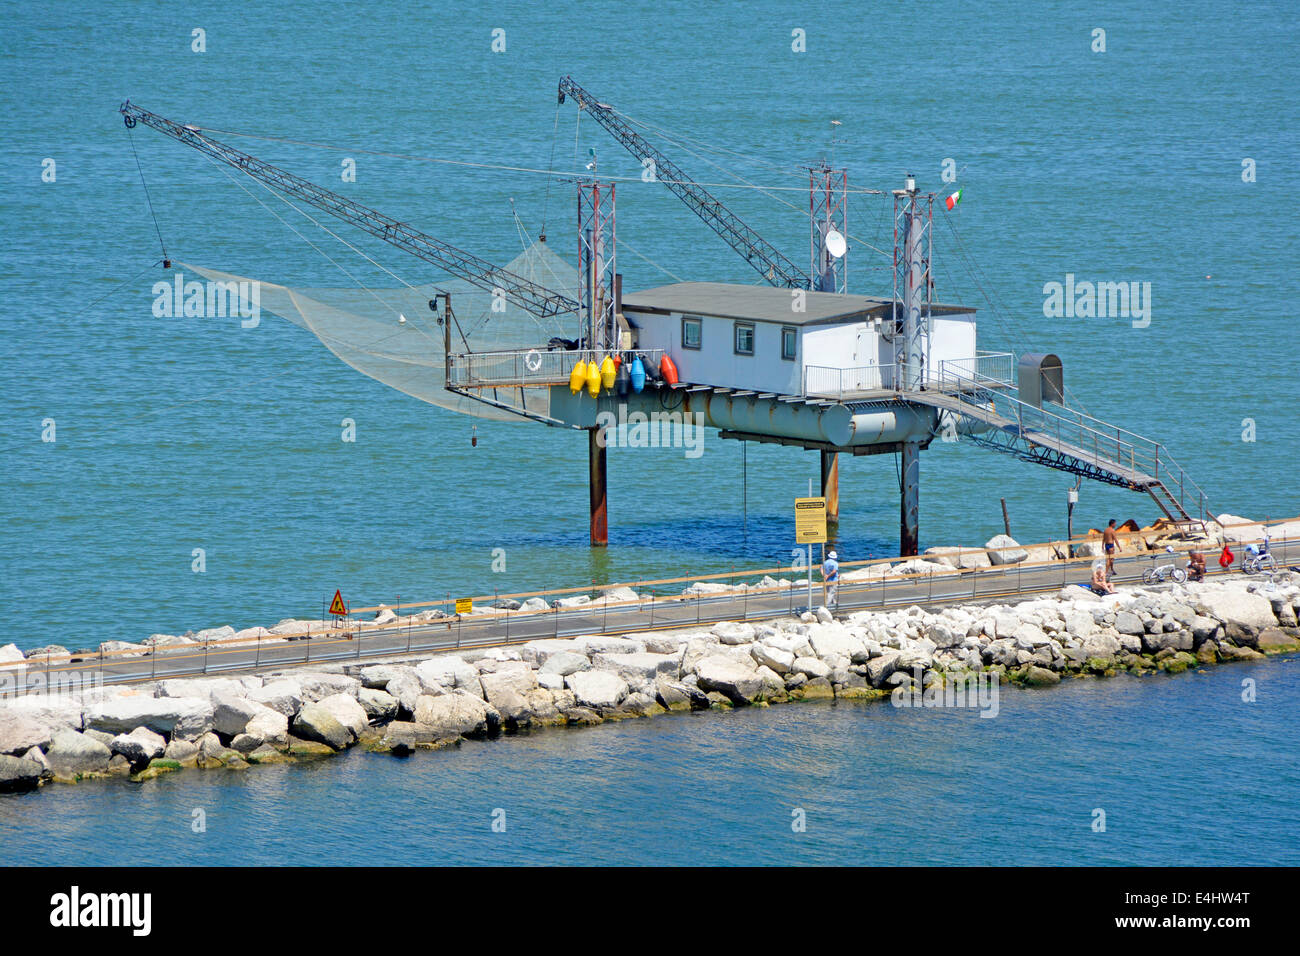 Closeup of unusual fishermens hut on stilts with large suspended net & access from public path along harbour breakwater Stock Photo